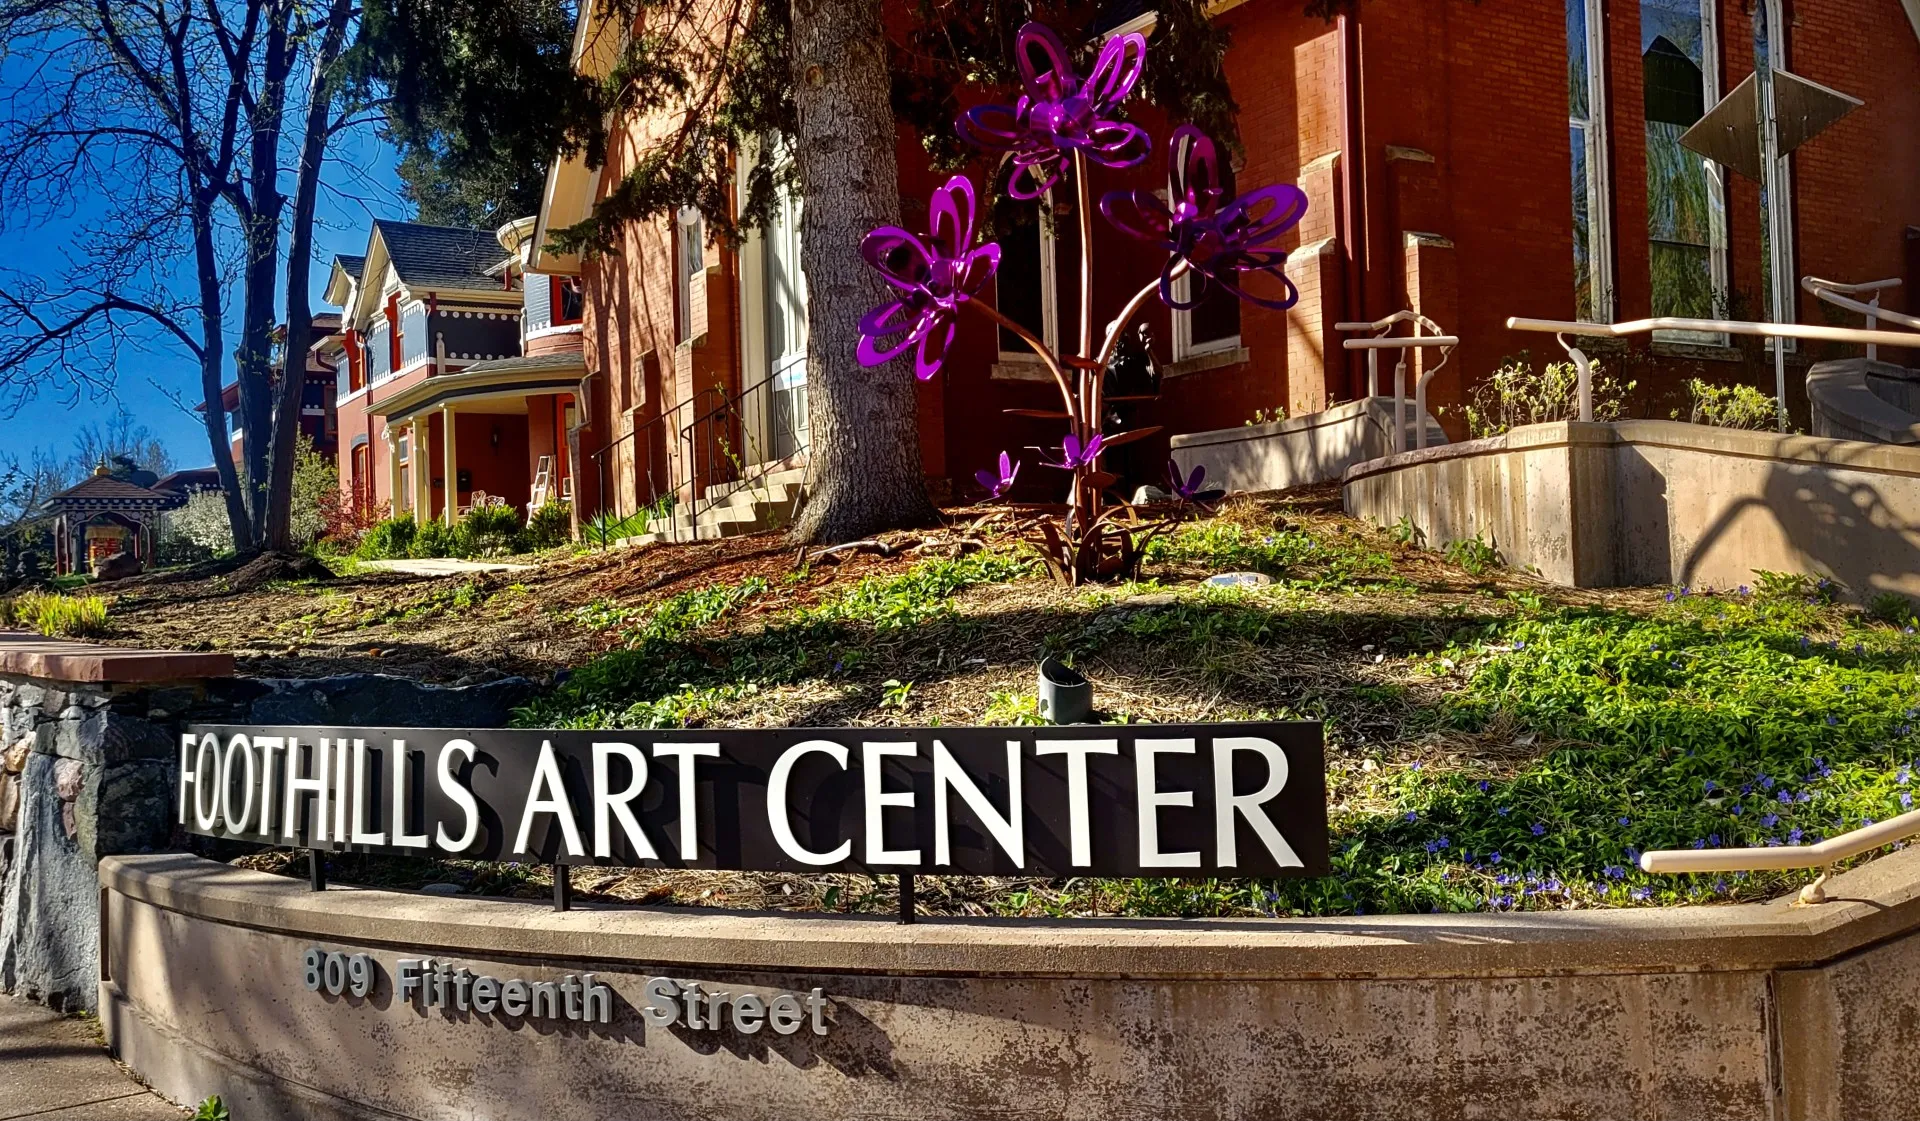 closeup of the "Foothills Art Center" sign with red brick buildng in the background